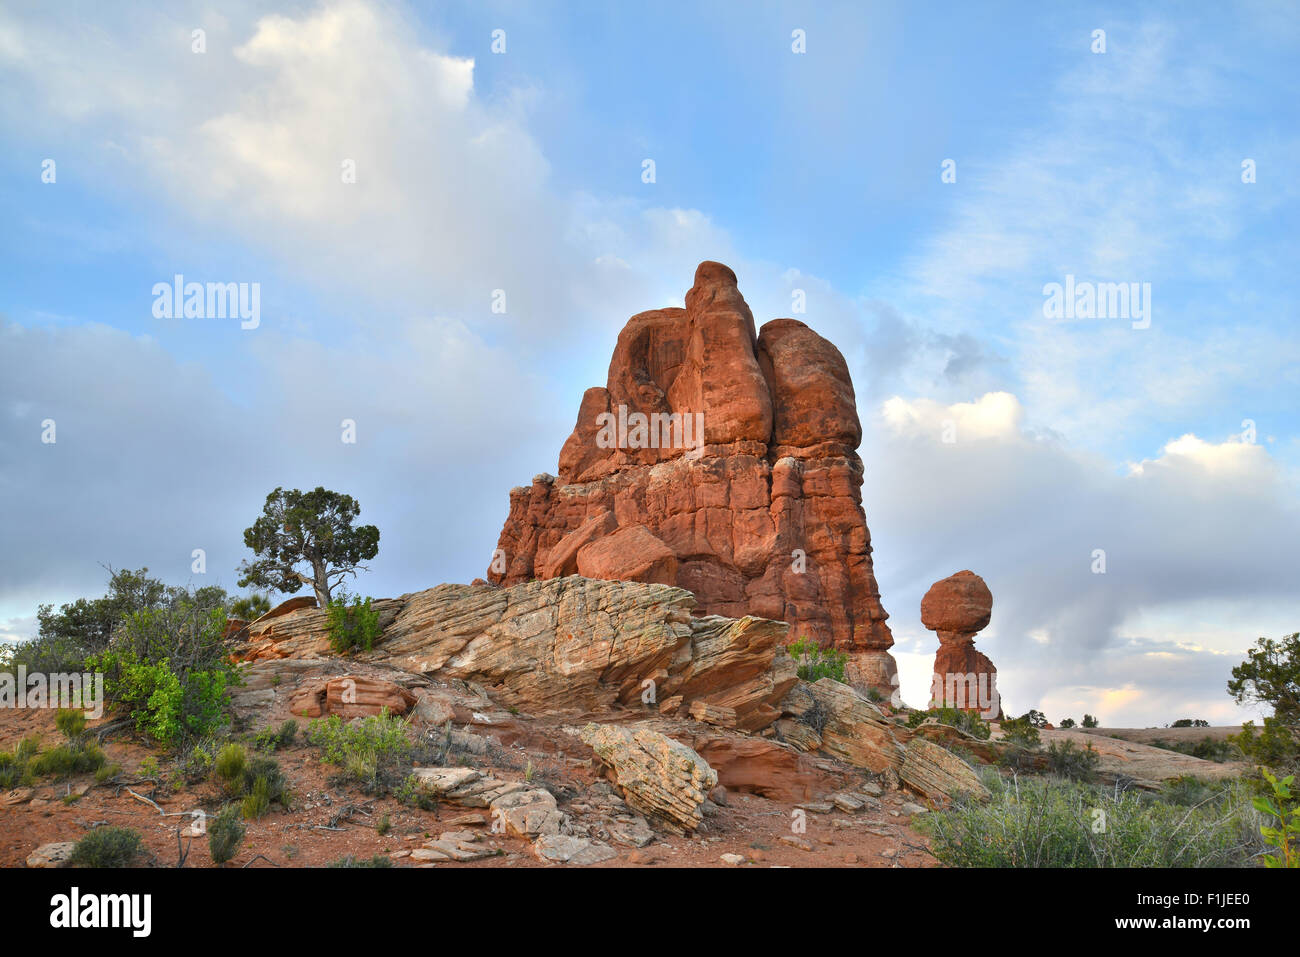 Balanced Rock section of Arches National Park Stock Photo